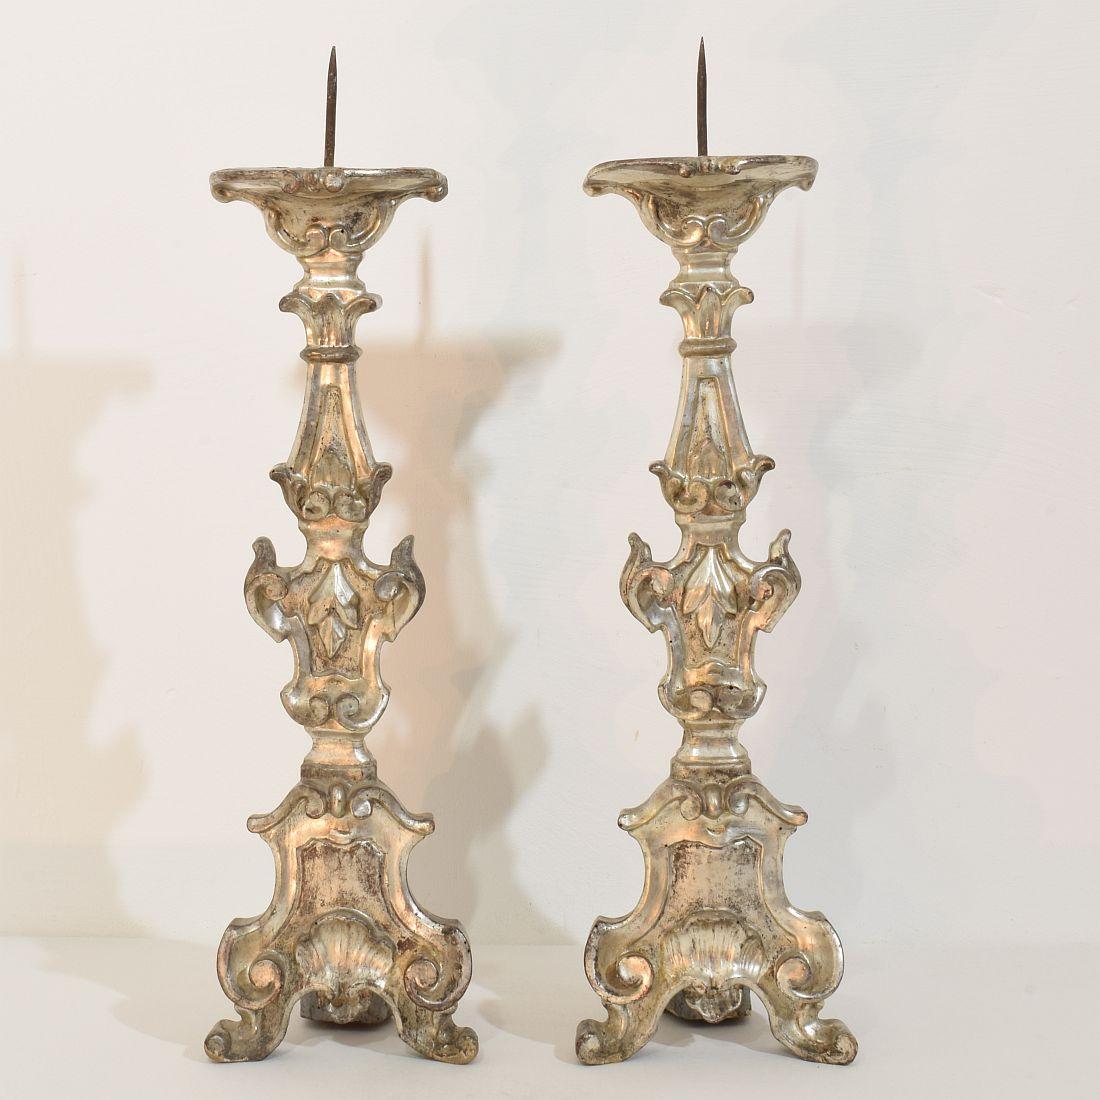 Hand-Carved Couple of 18th Century Italian Baroque Carved Wooden And Silvered Candlesticks For Sale